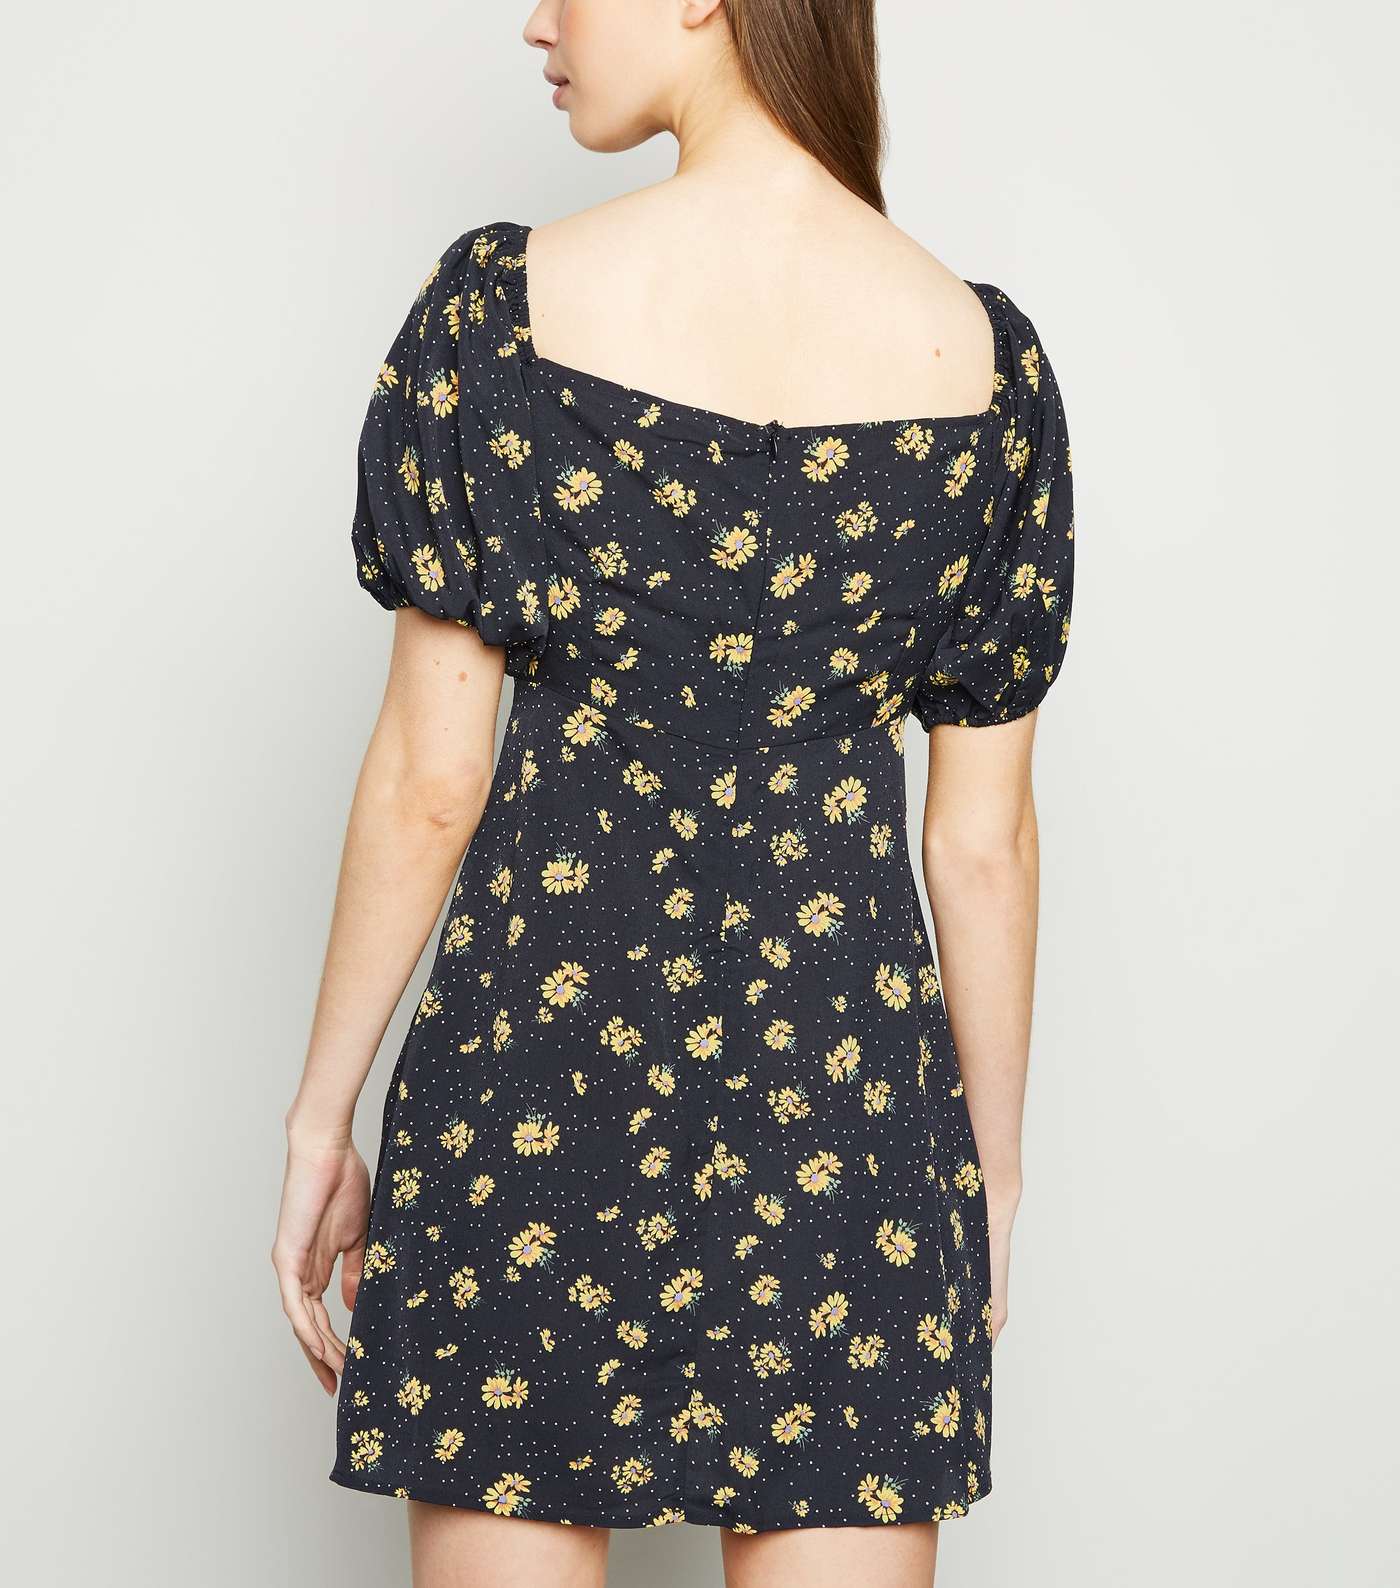 Urban Bliss Yellow Floral and Spot Mini Dress Image 3